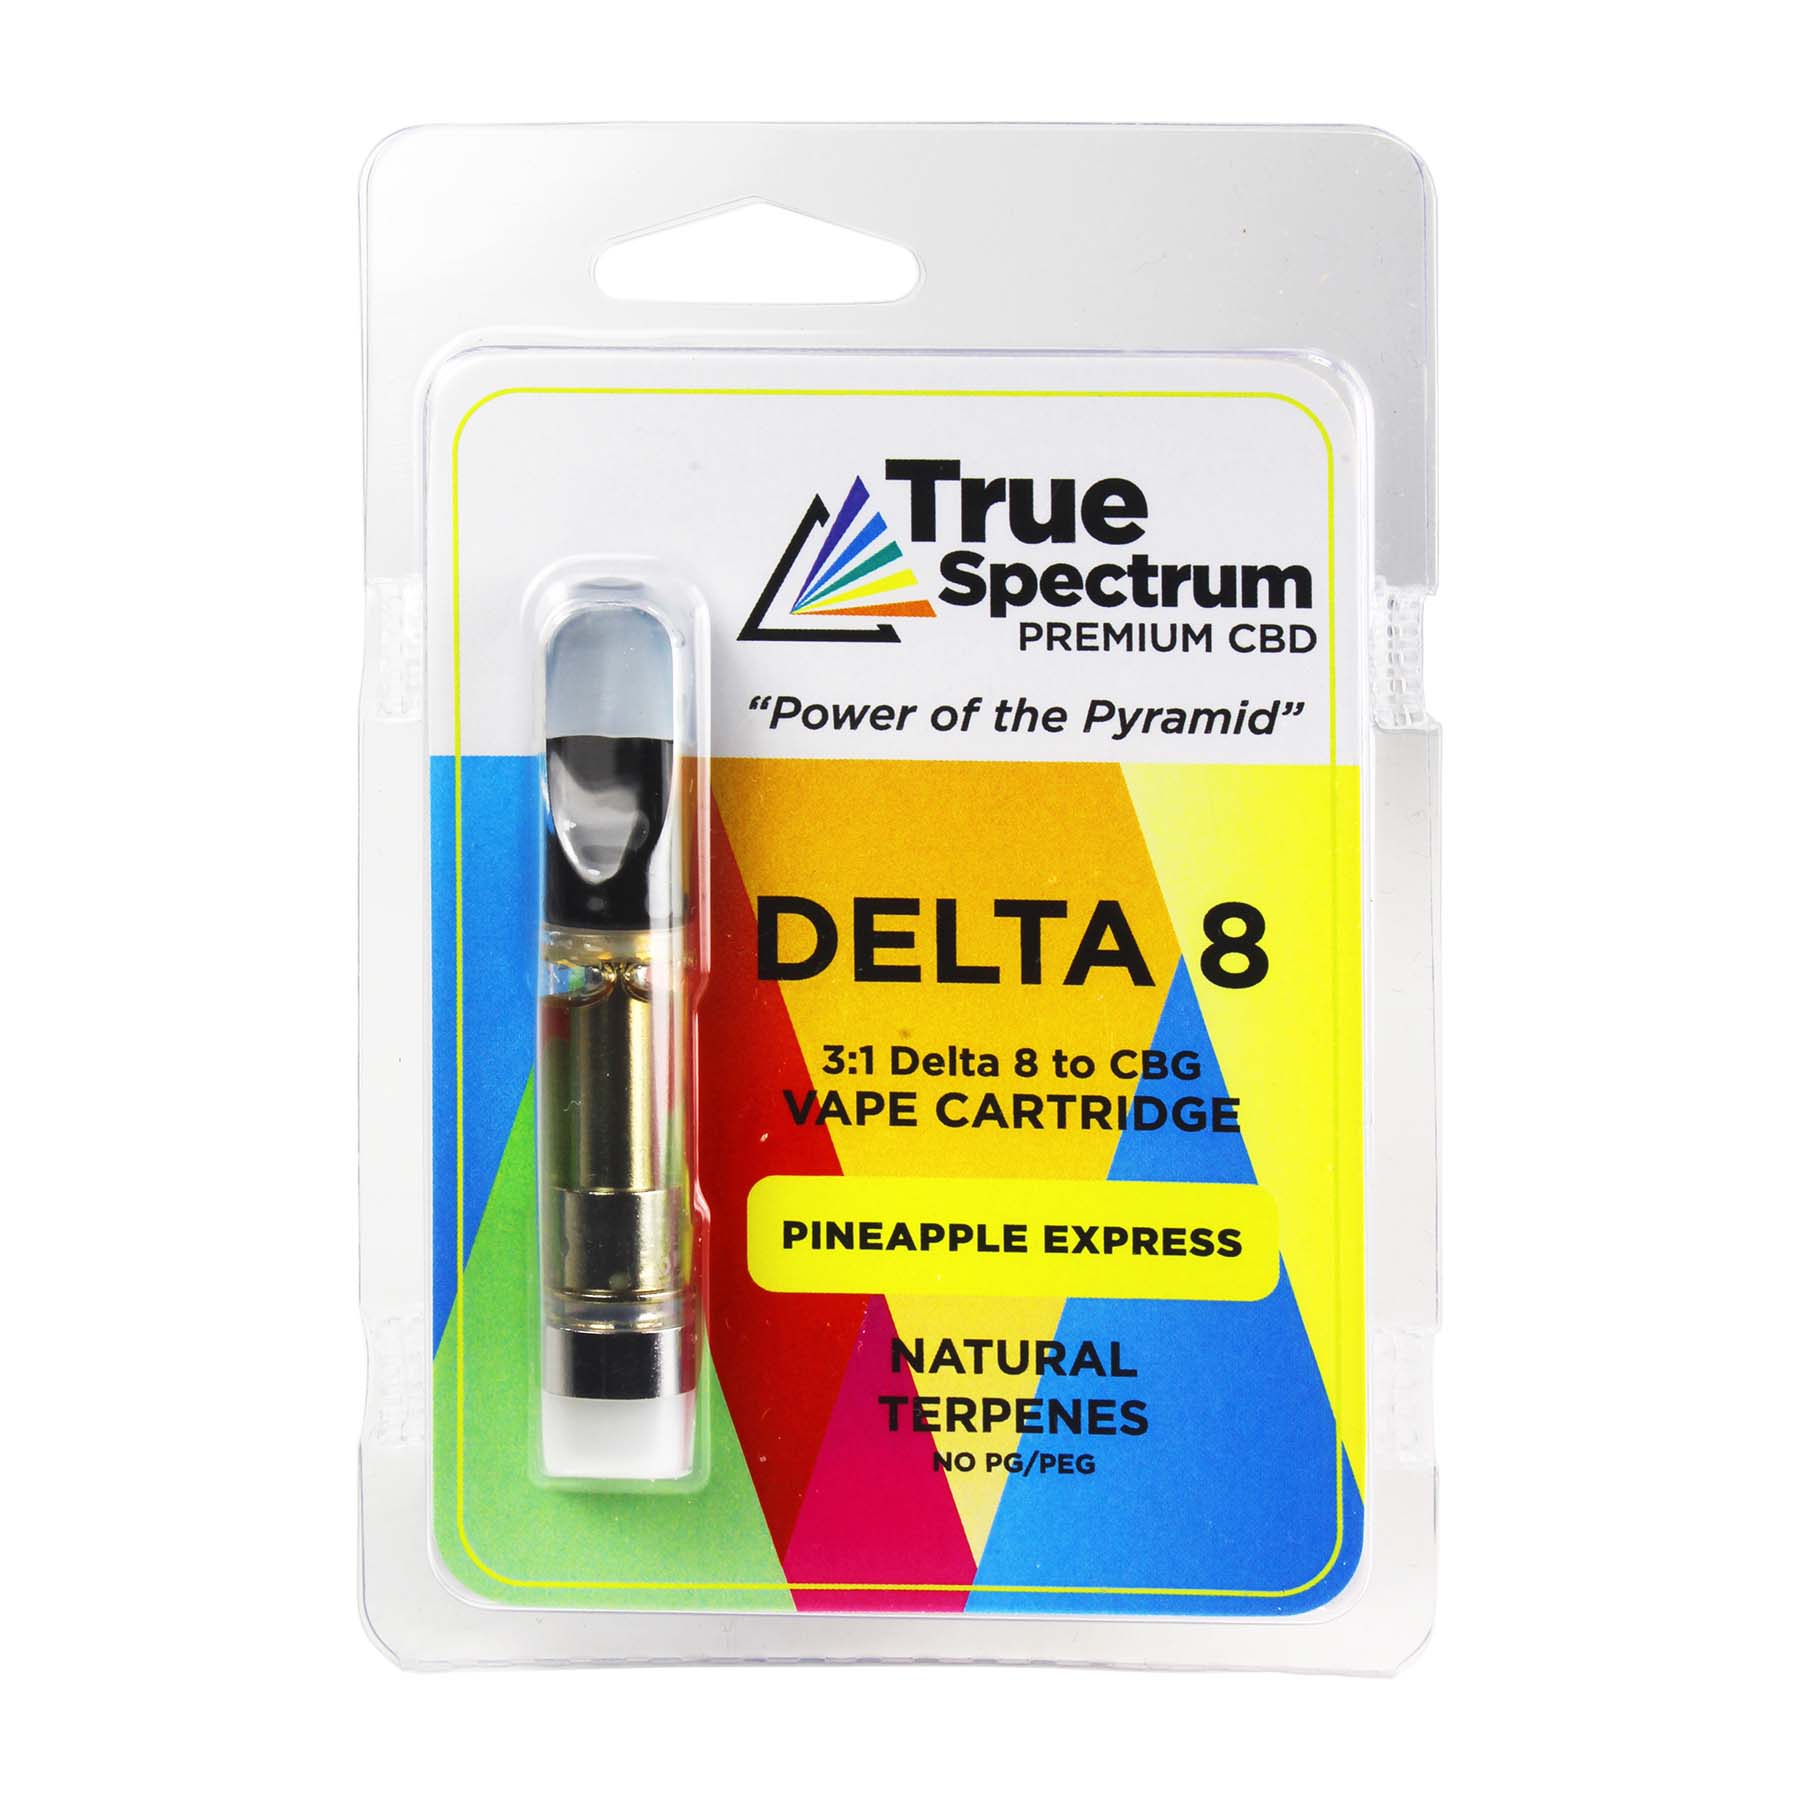 Delta 8 & 10 By My True Spectrum-The Ultimate Comprehensive Review of Top Delta 8 & 10 Products